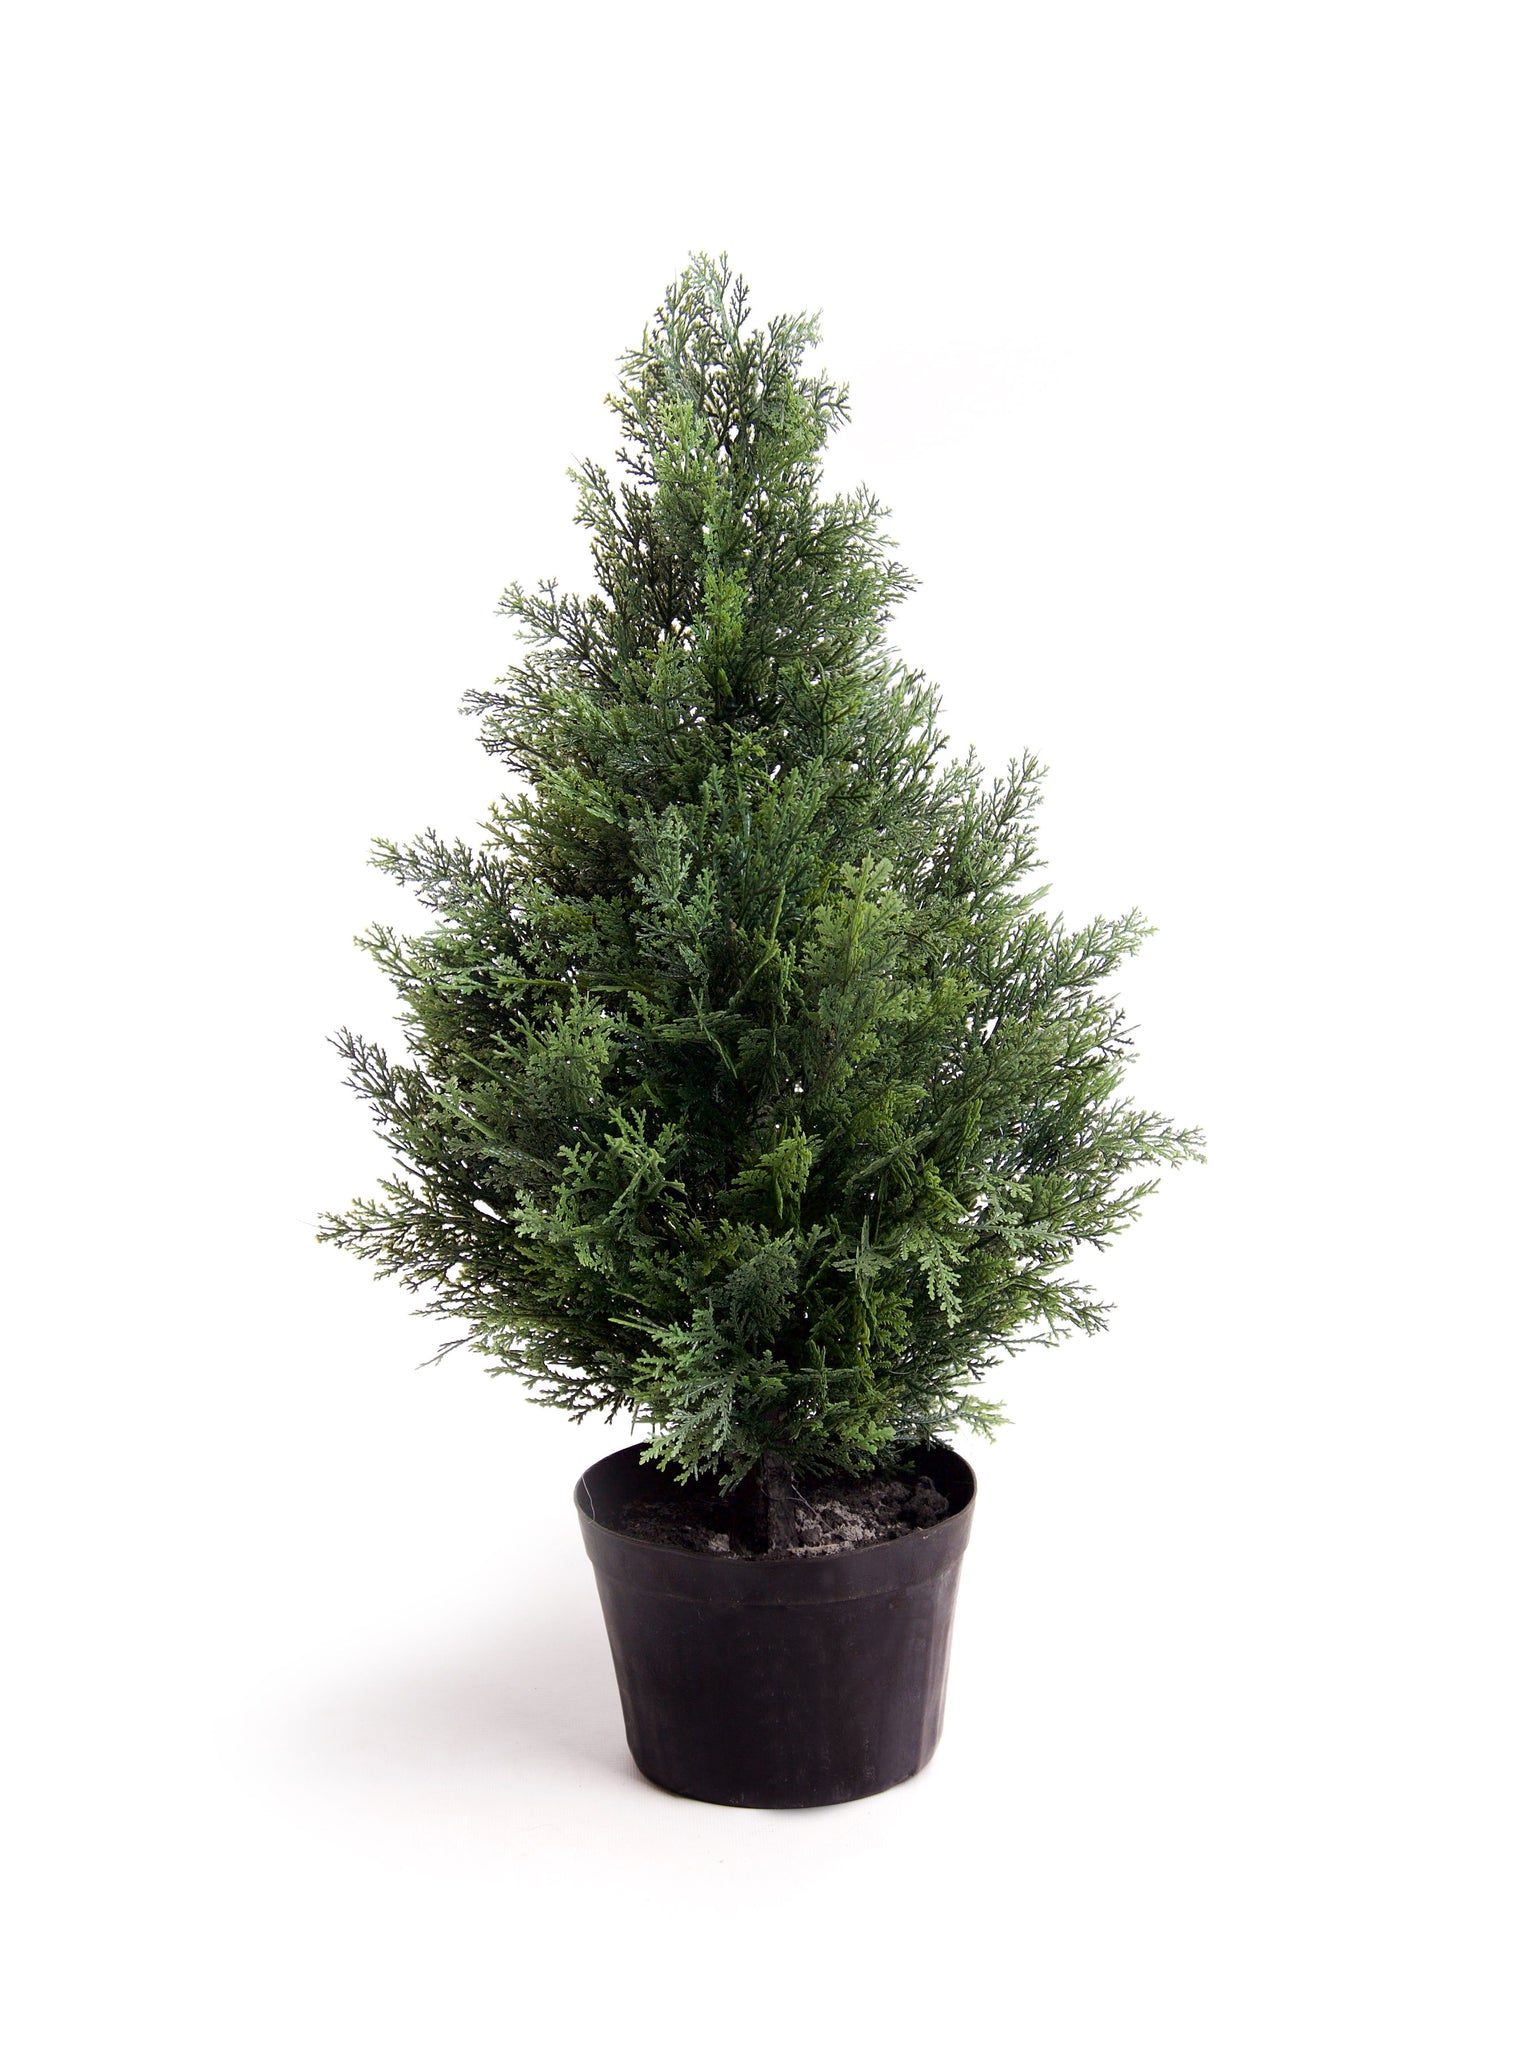 Best Artificial Potted Cedar Topiary Tree